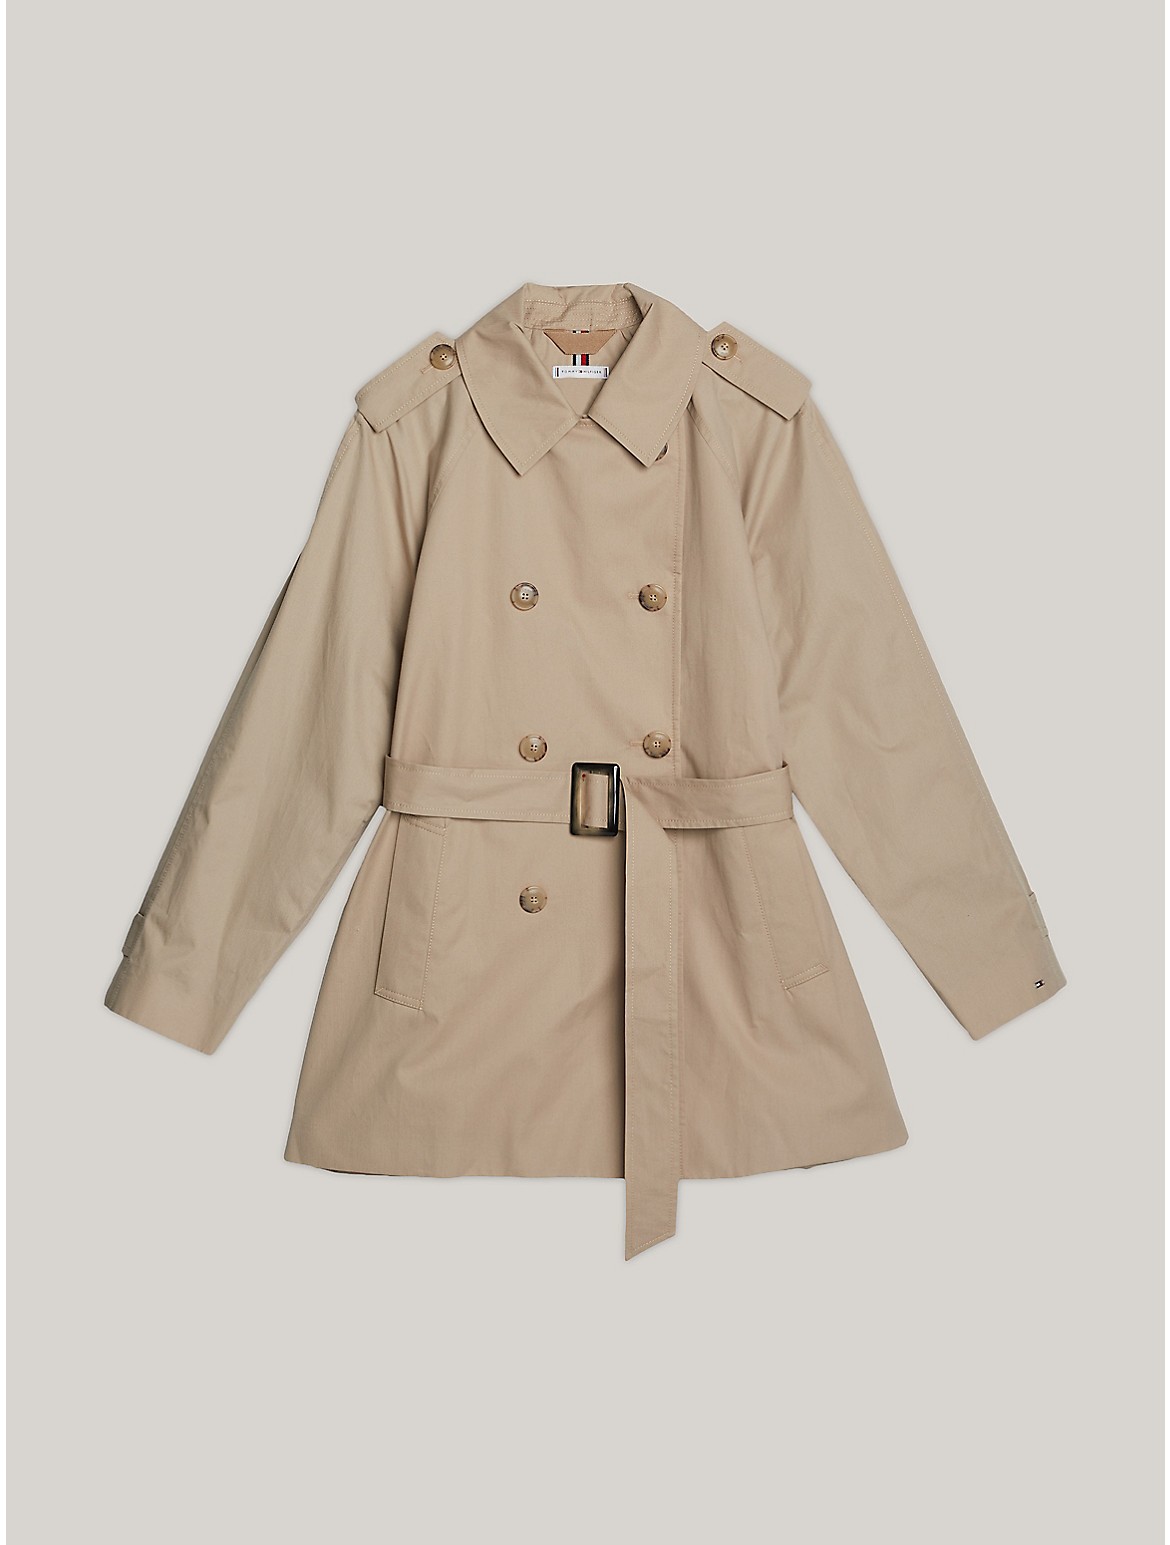 Tommy Hilfiger Women's Belted Trench Coat